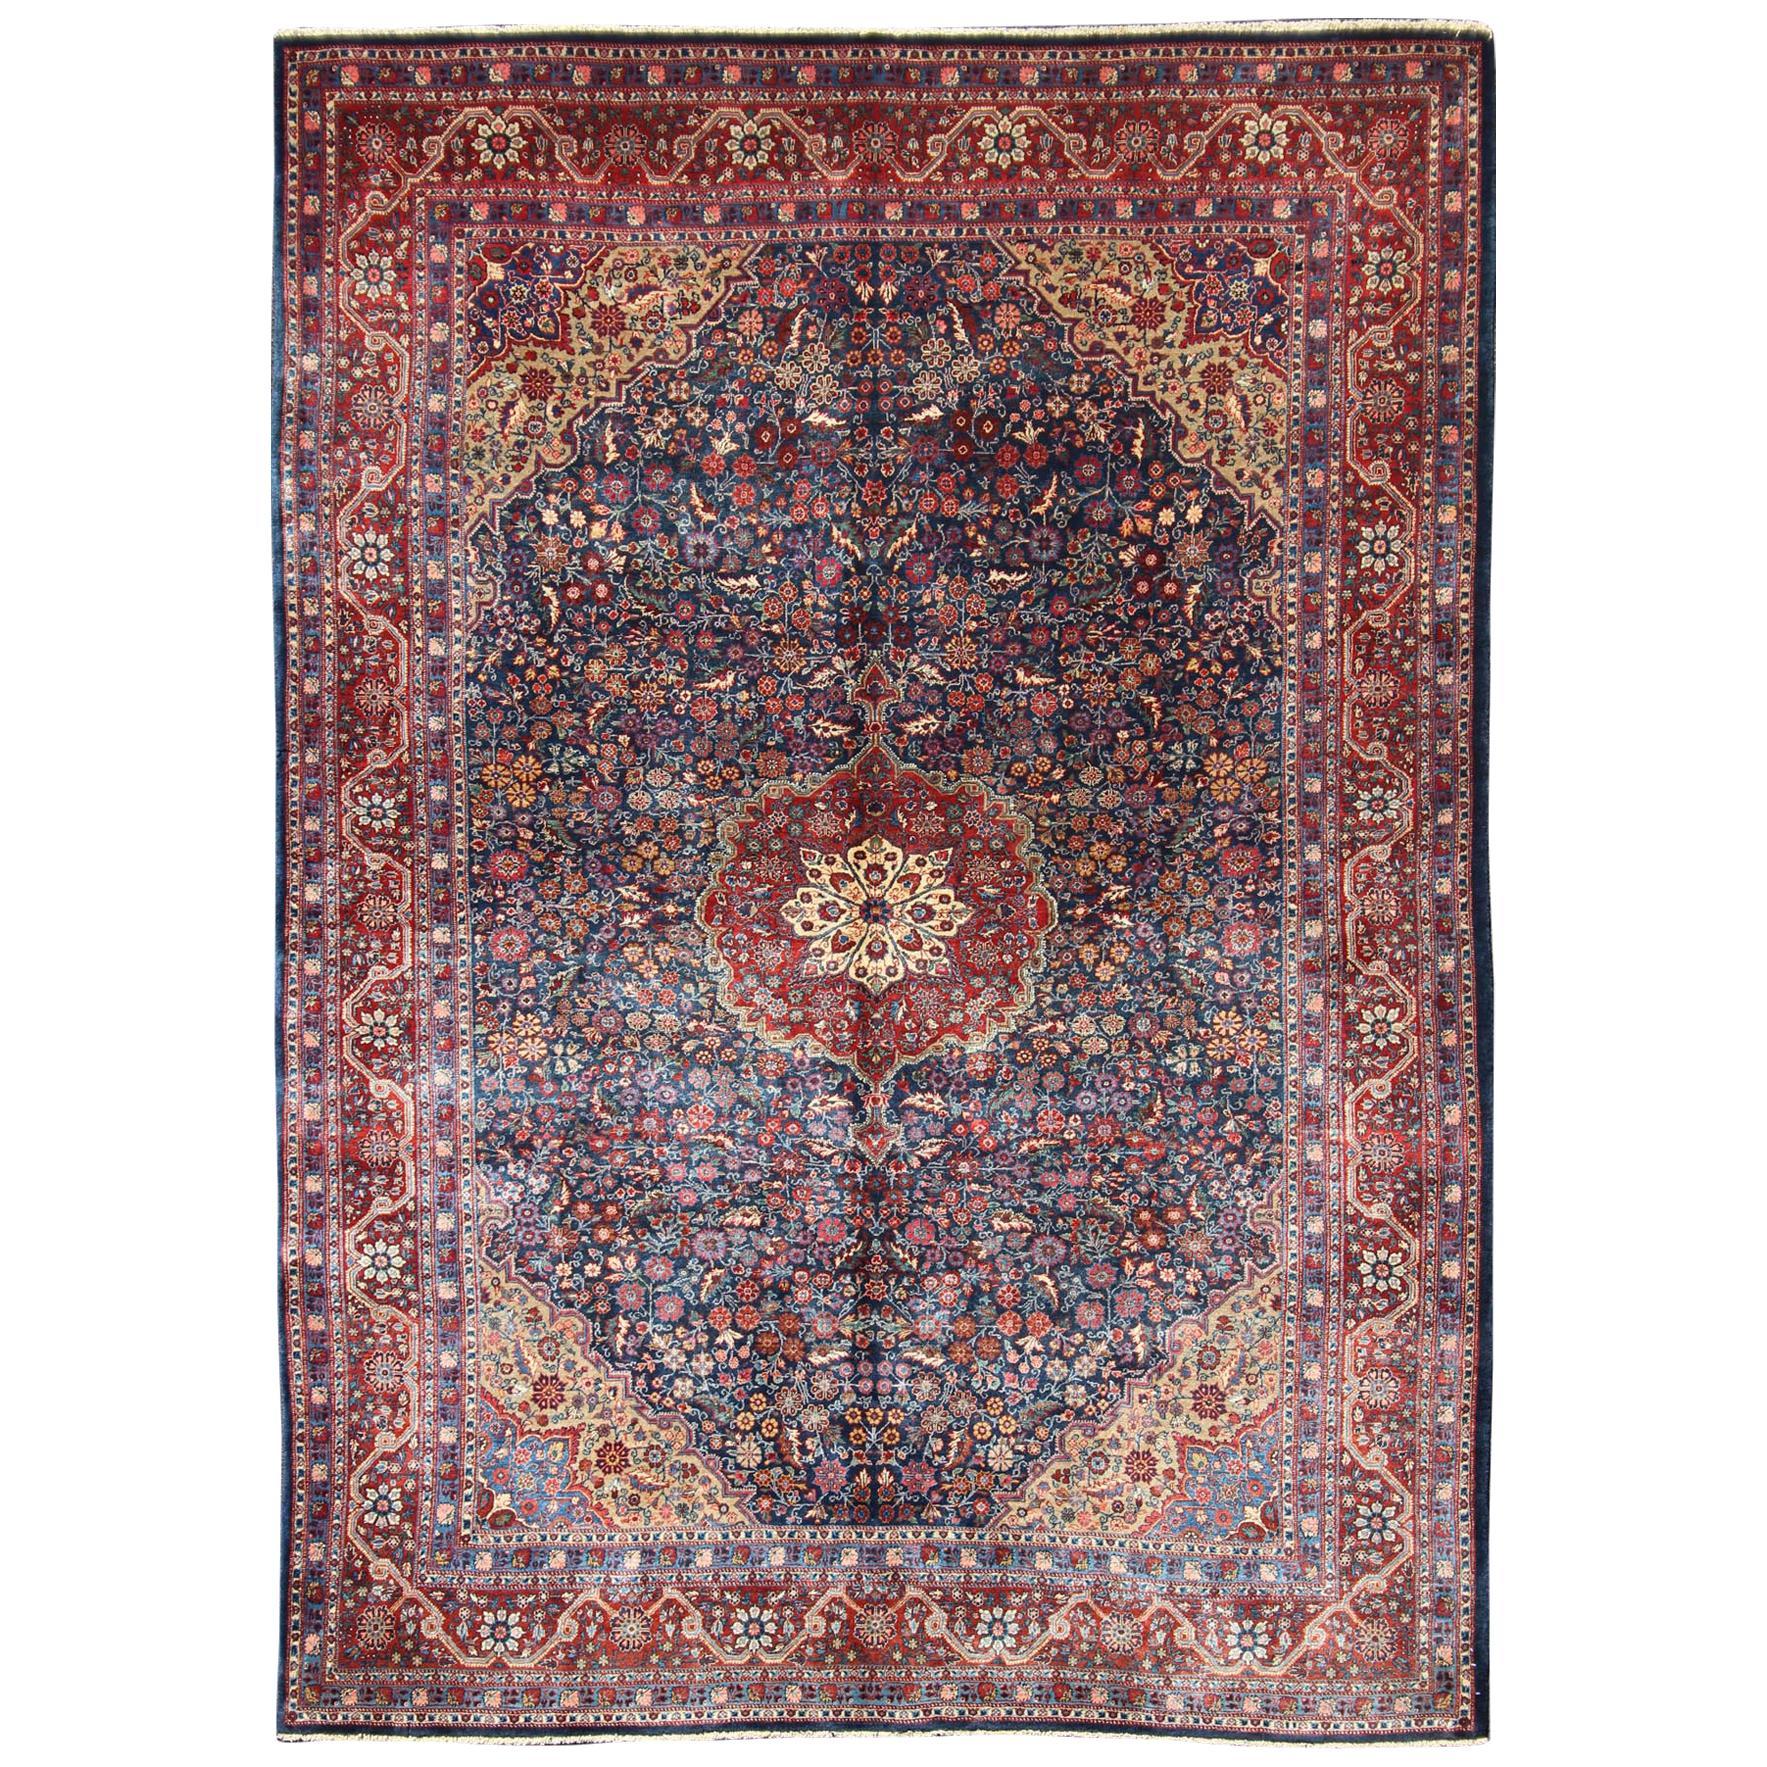 Antique Tribal Medallion Josan Rug with Jewel Tones with Center Medallion